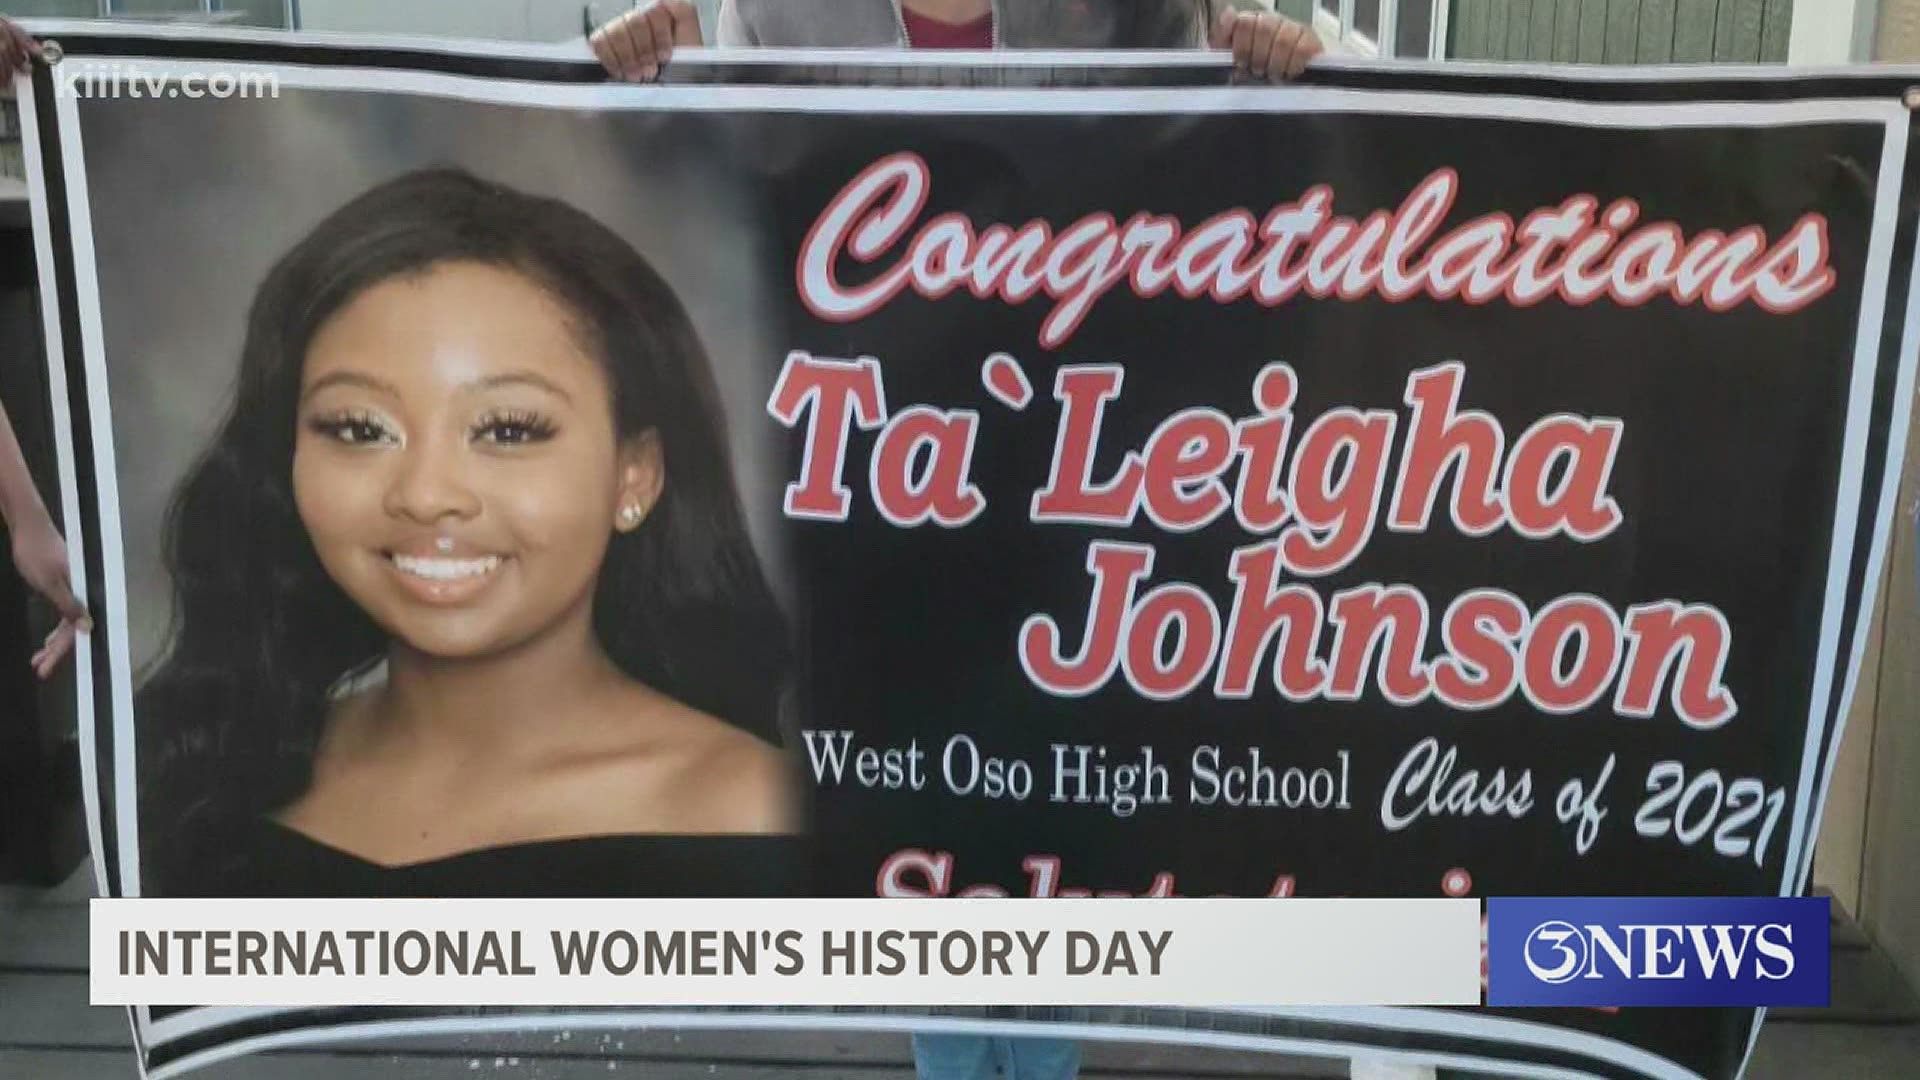 As we honor women for Women's History Month and International Women's Day, Ta'Leigha Johnson says she's proud of herself, for overcoming the challenges she's faced.